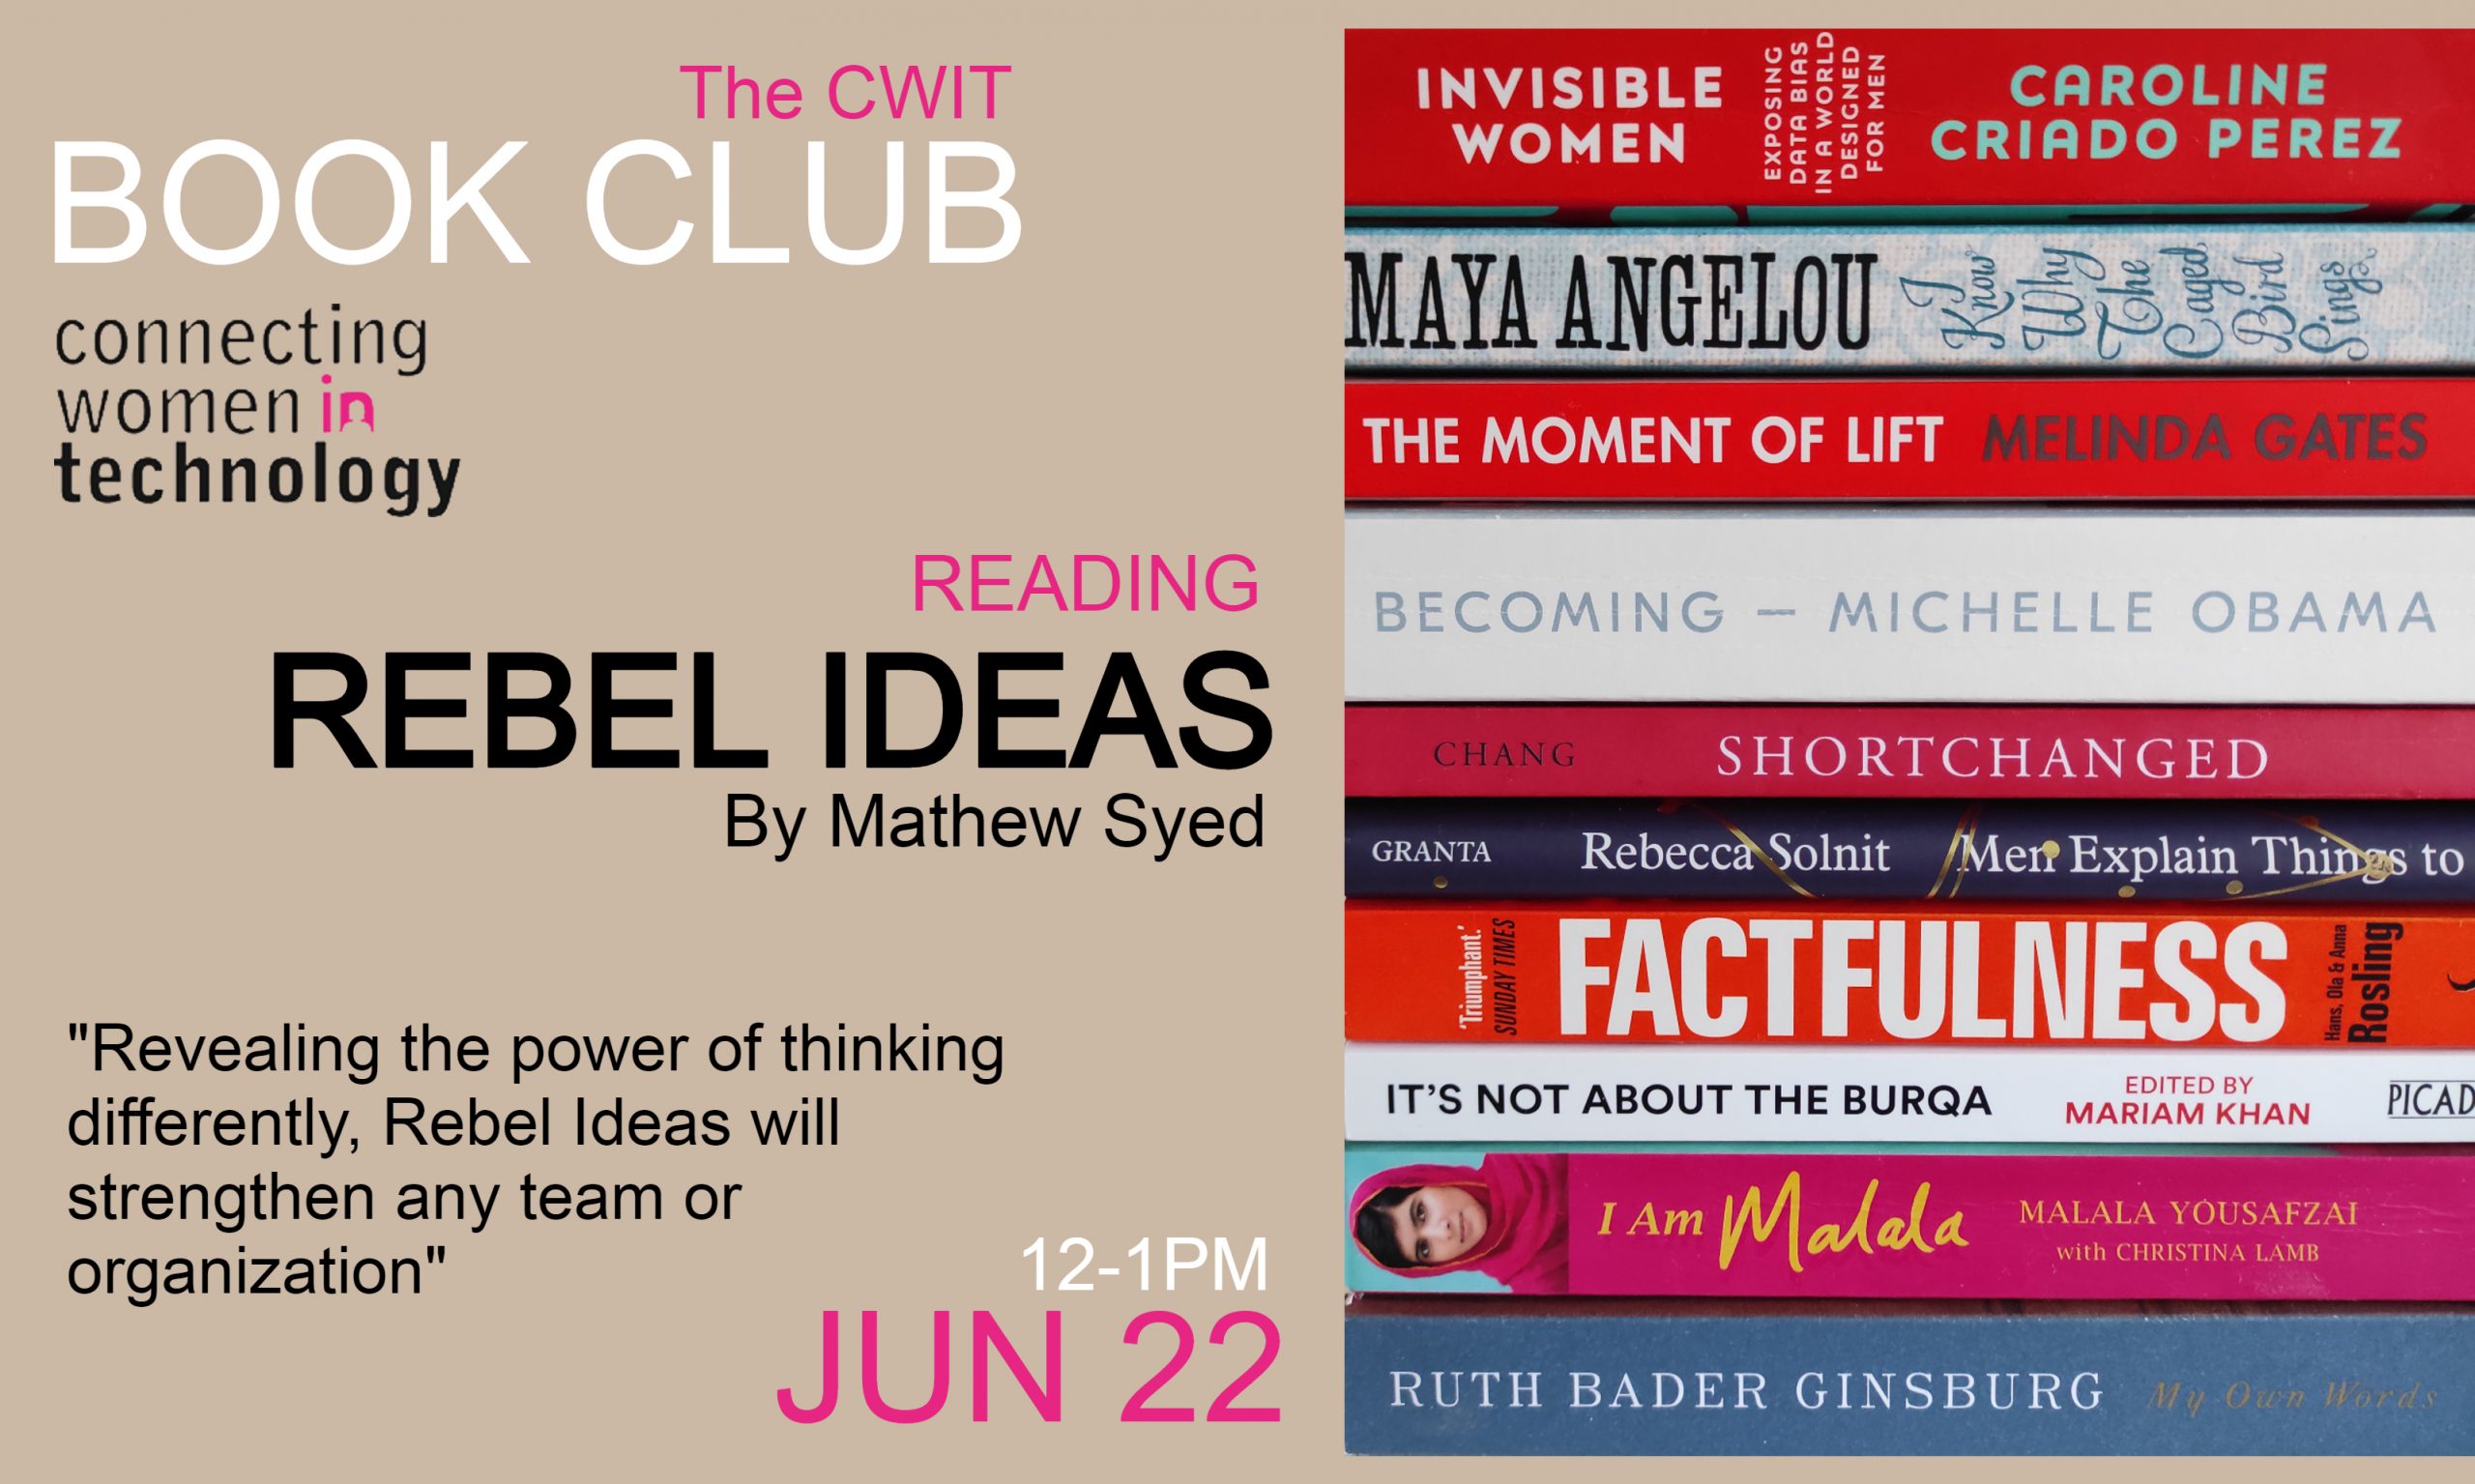 CWiT Books & Culture Club- Reading "Rebel Ideas" by Matthew Syed